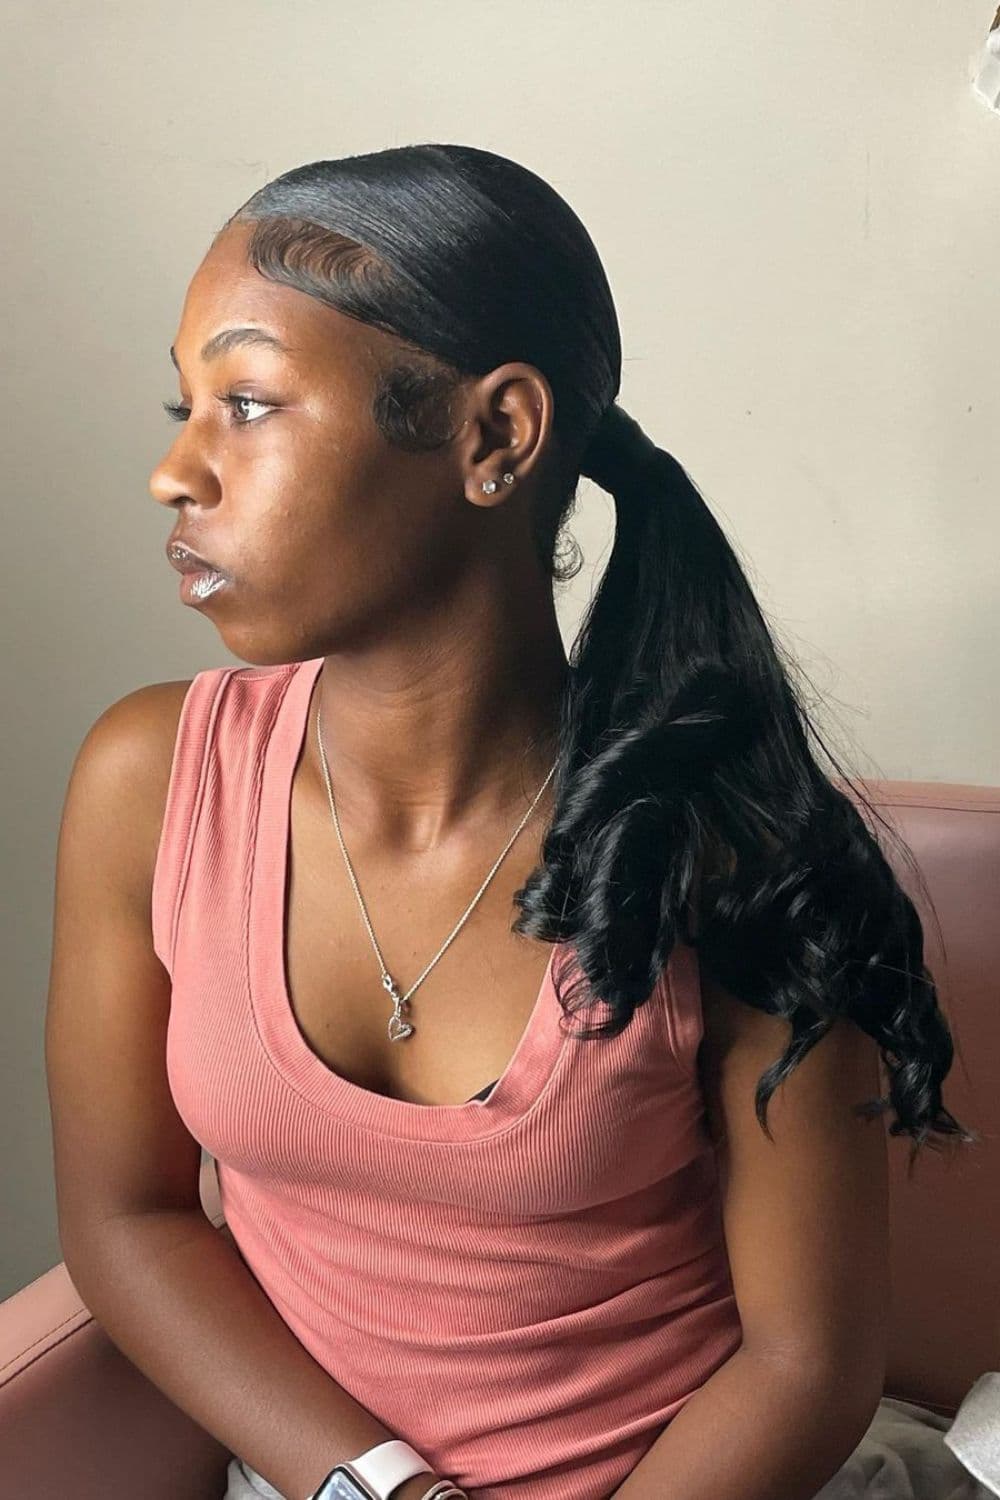 Side view of a woman sitting on a chair with a black low ponytail.